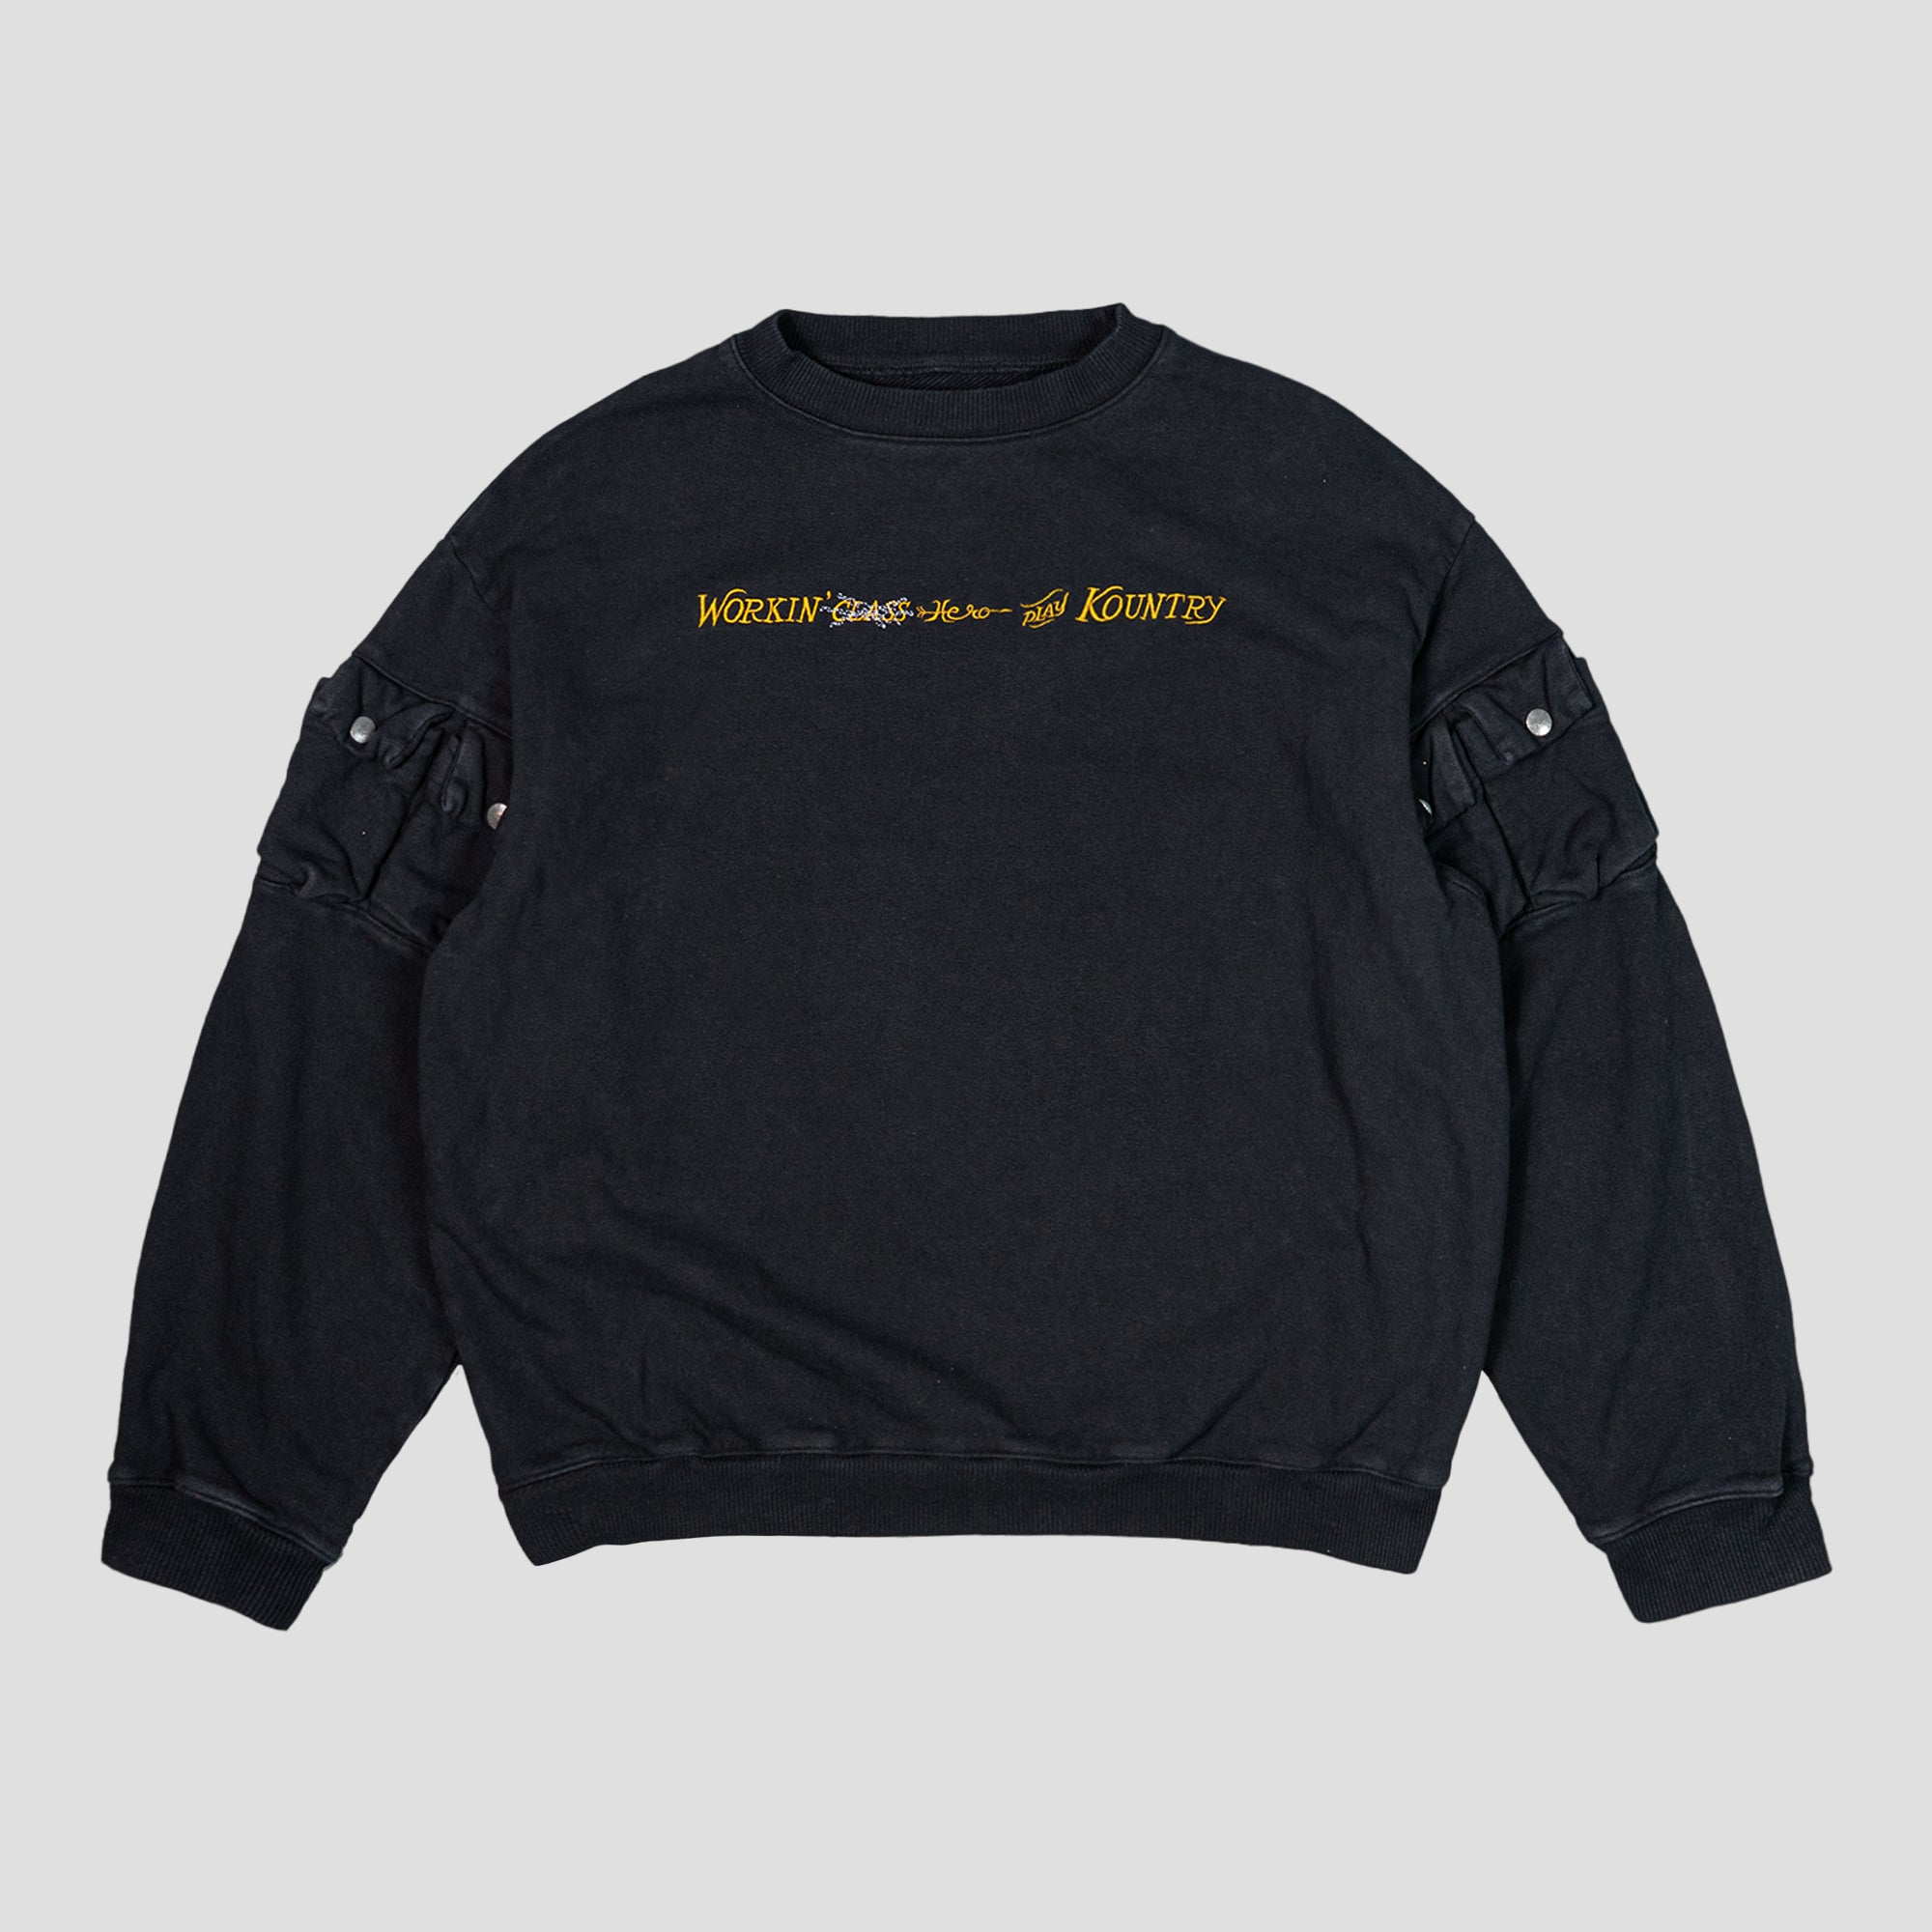 SWEAT SHIRTS WITH UTILITY POCKETS ON SLEEVES